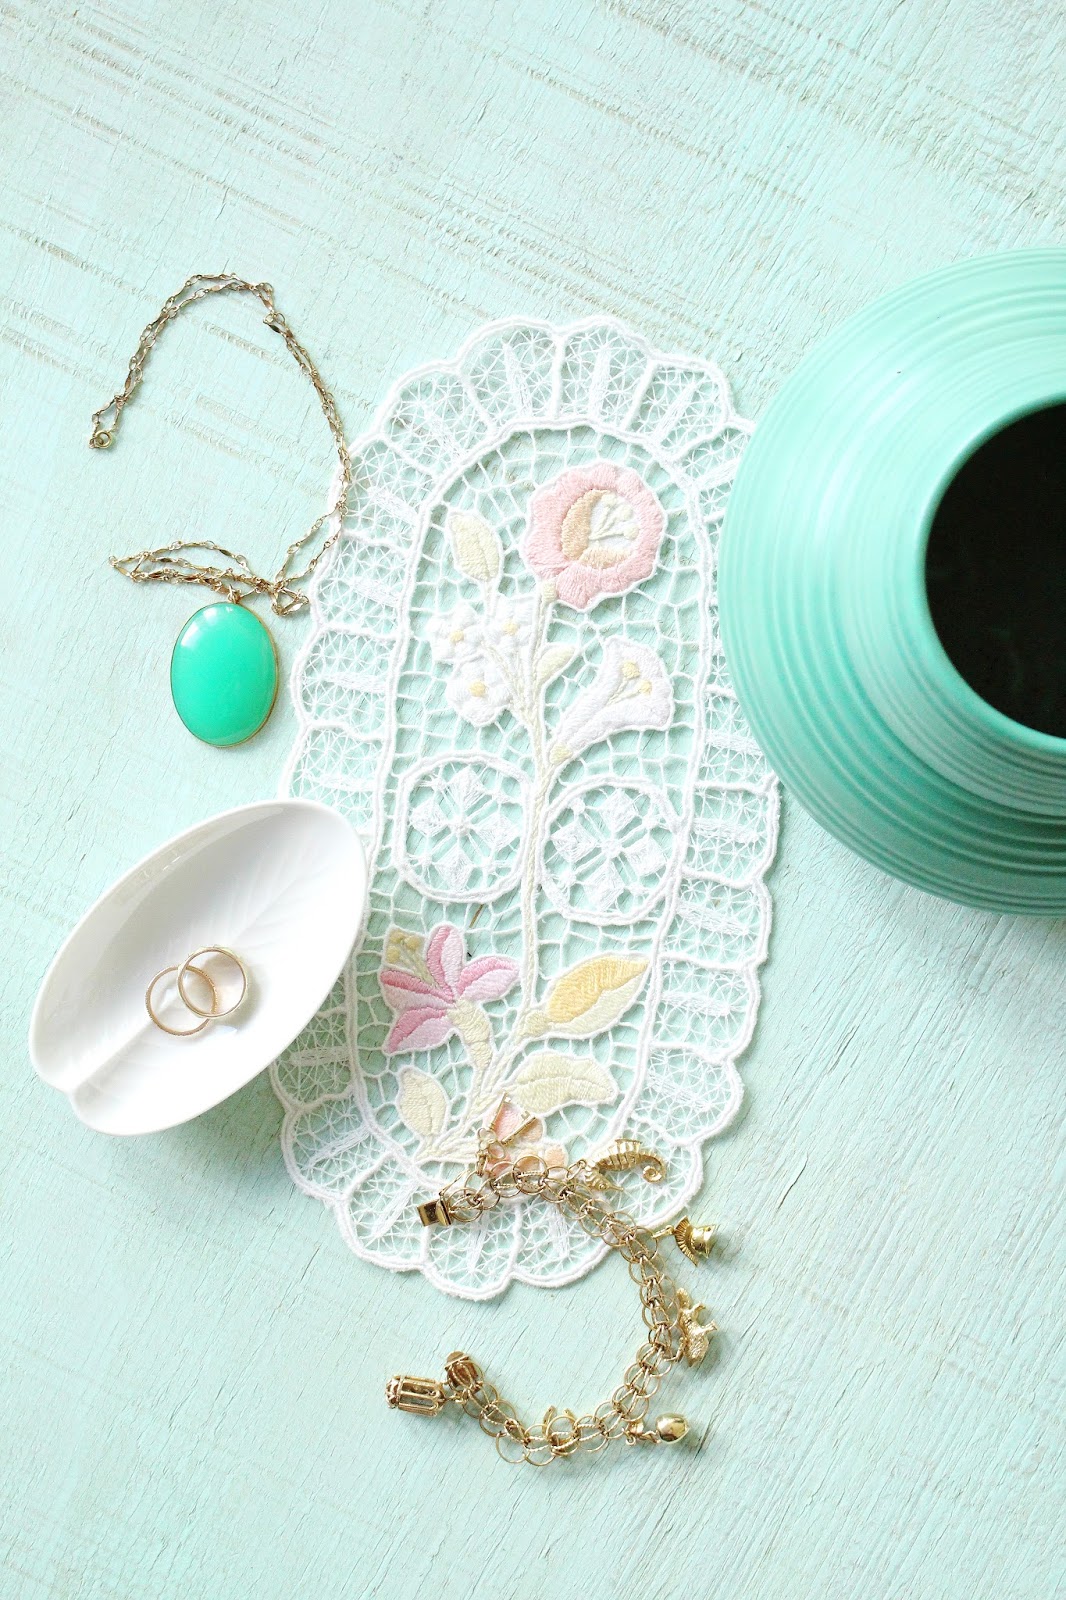 How to Bleach and Overdye Hungarian Embroideries